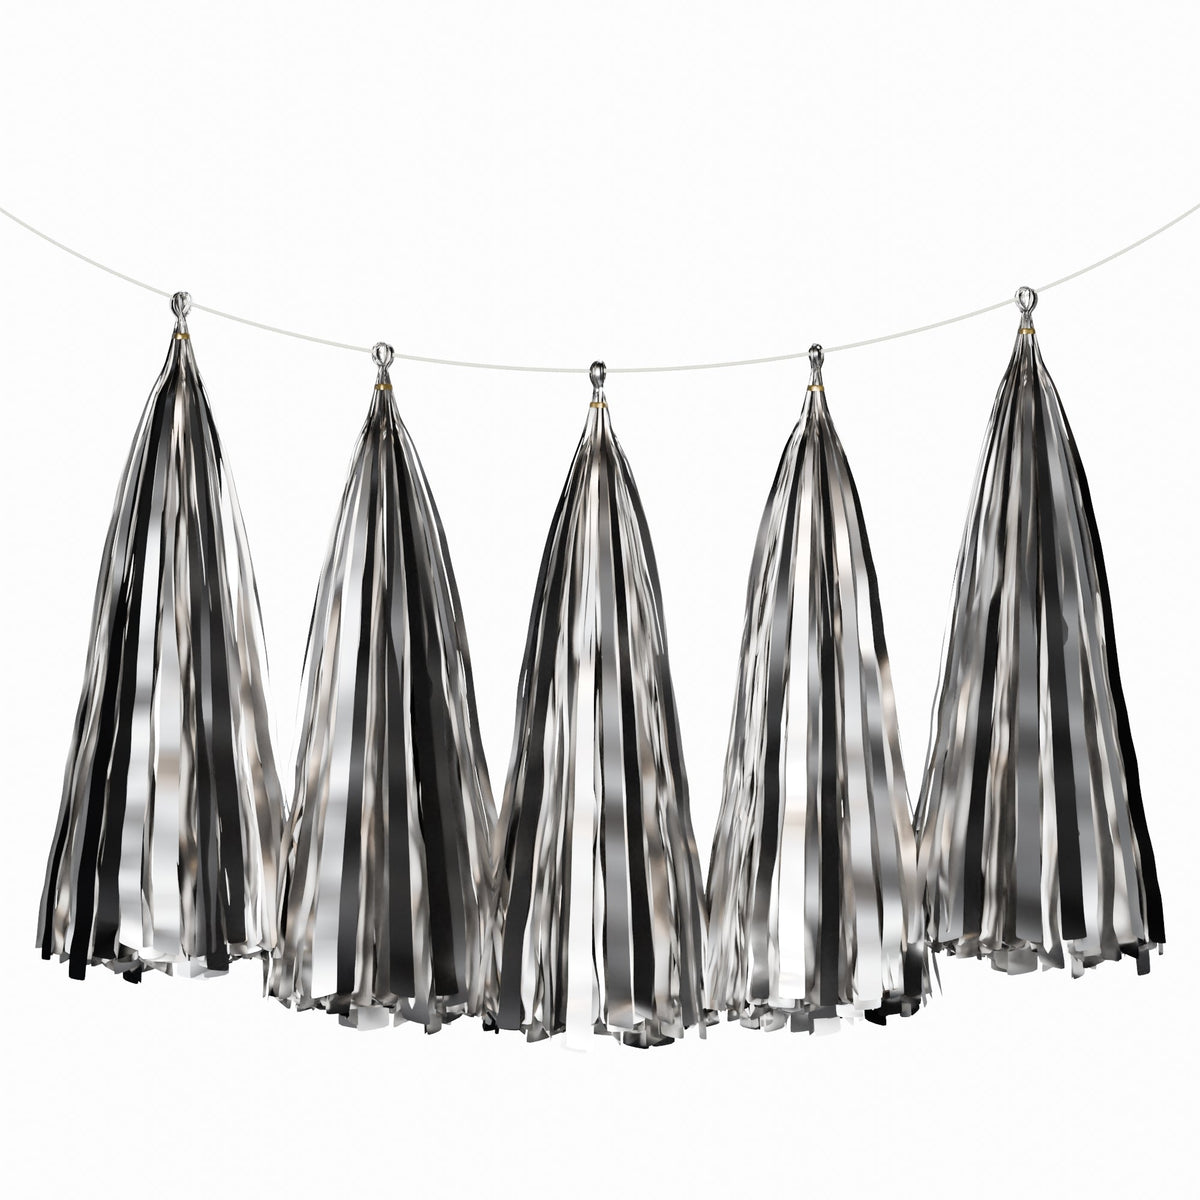 Weifang Mayshine Imp&exp co Decorations Metallic Silver Tassel Garland, 5 Count 810064197352